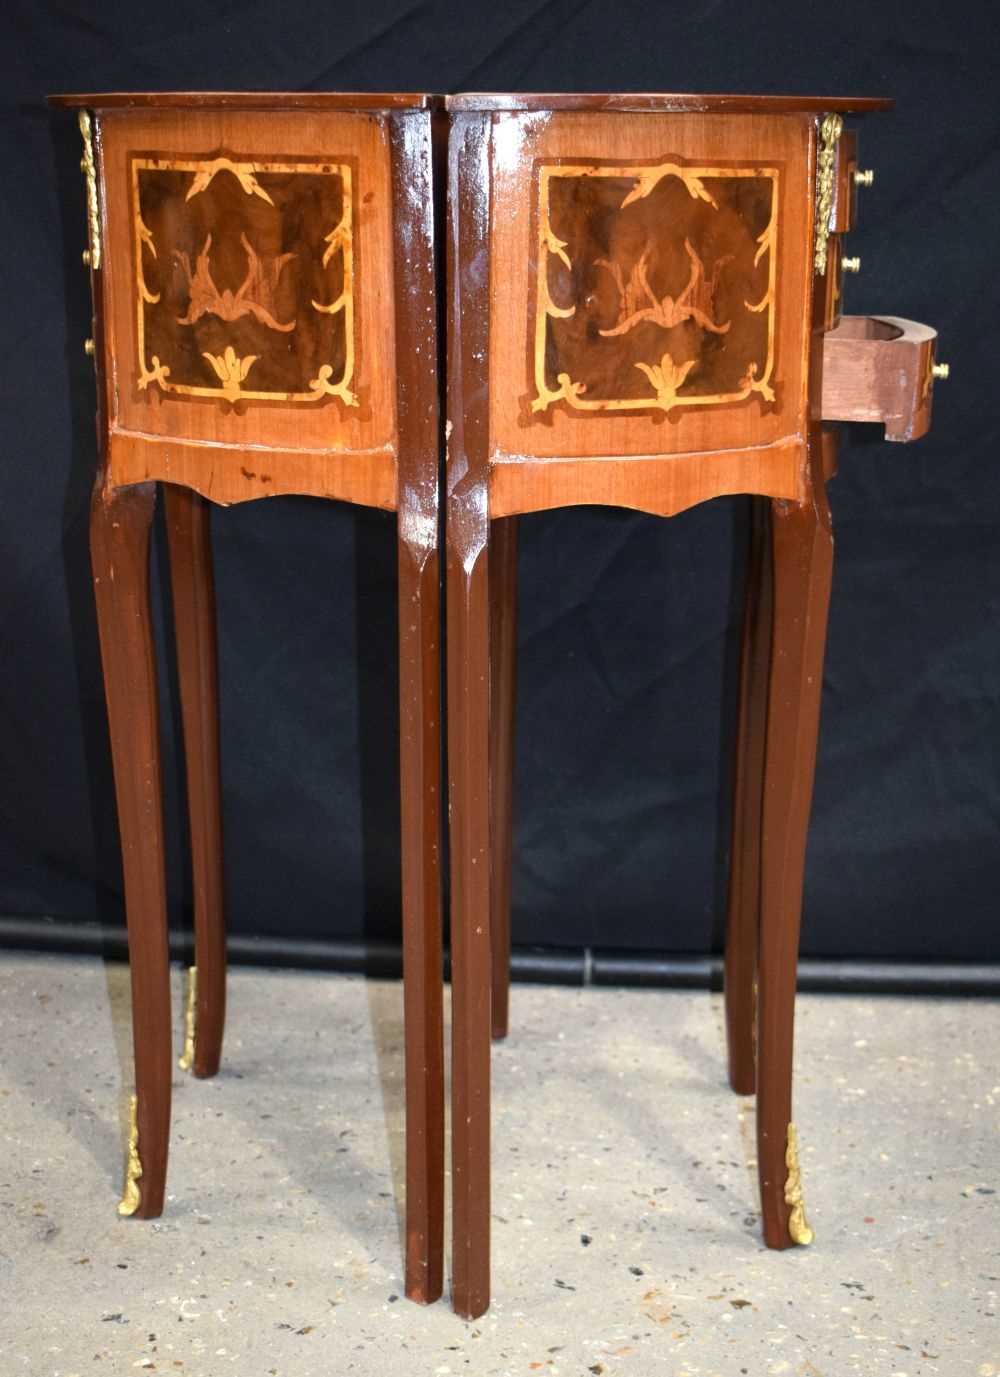 A pair of Baroque style inlaid half moon side 3 drawer tables 71 x 45 x 25cm (2) - Image 5 of 10